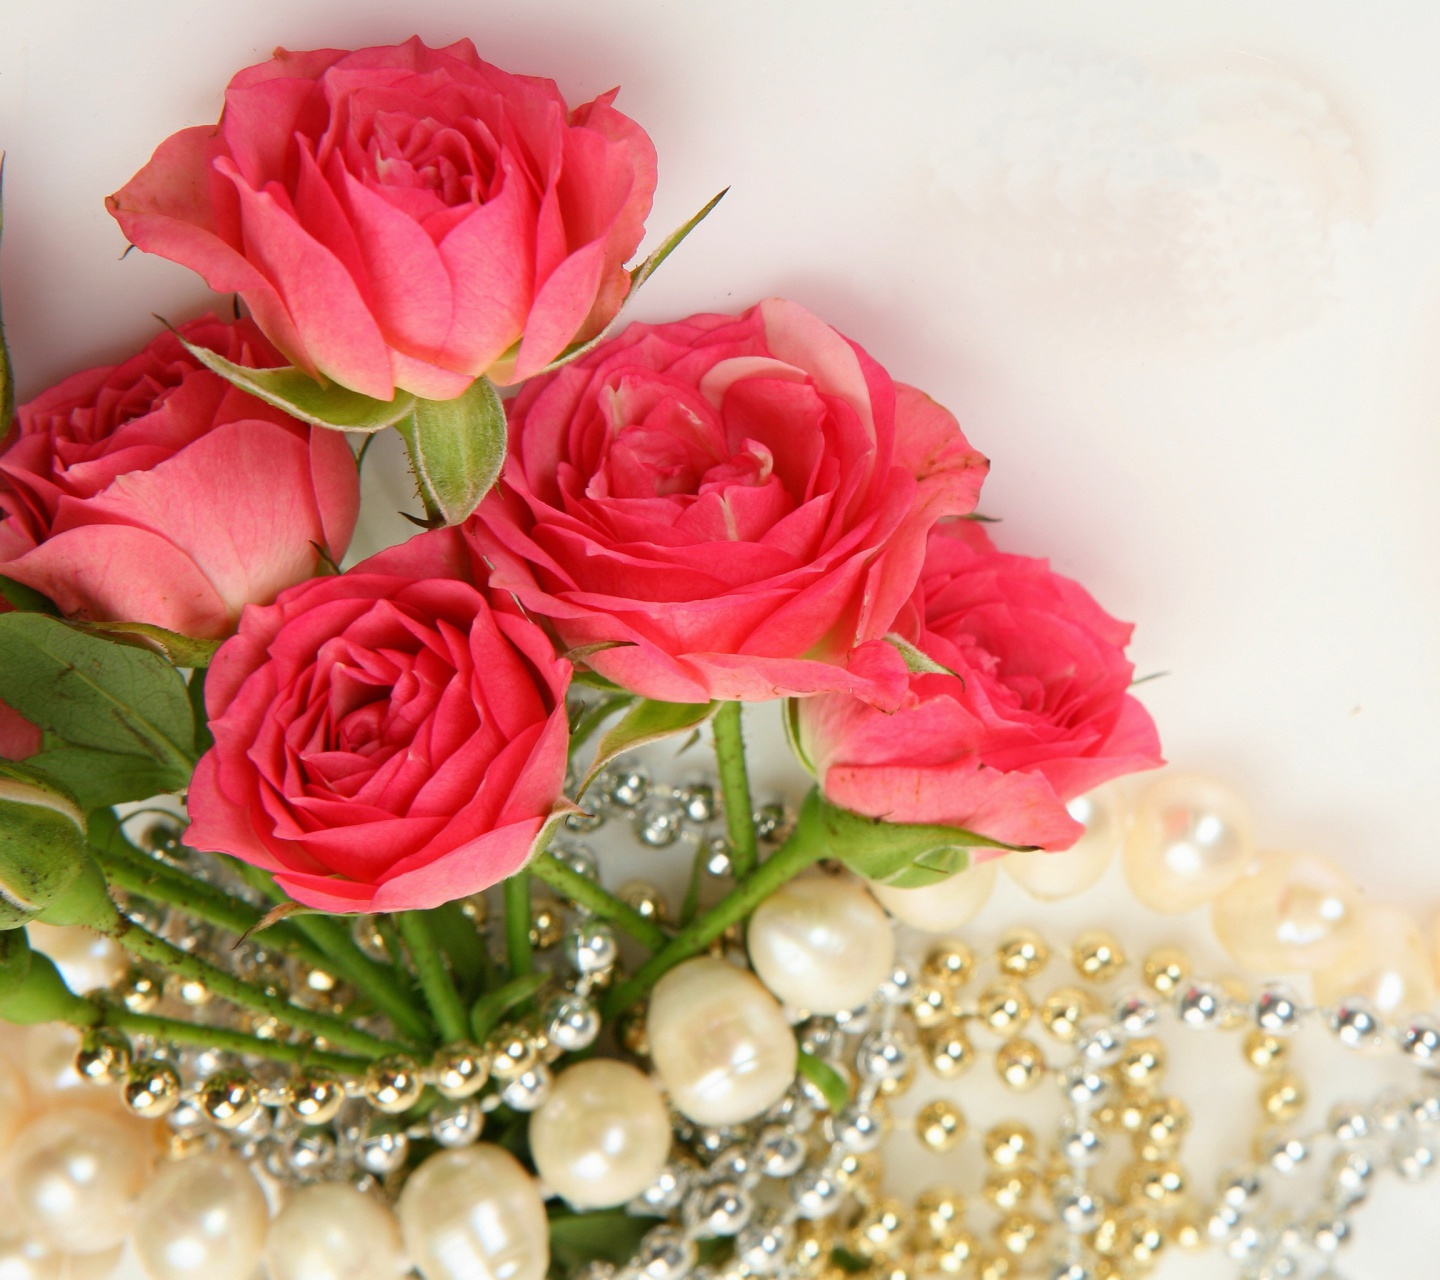 Necklace and Roses Bouquet wallpaper 1440x1280